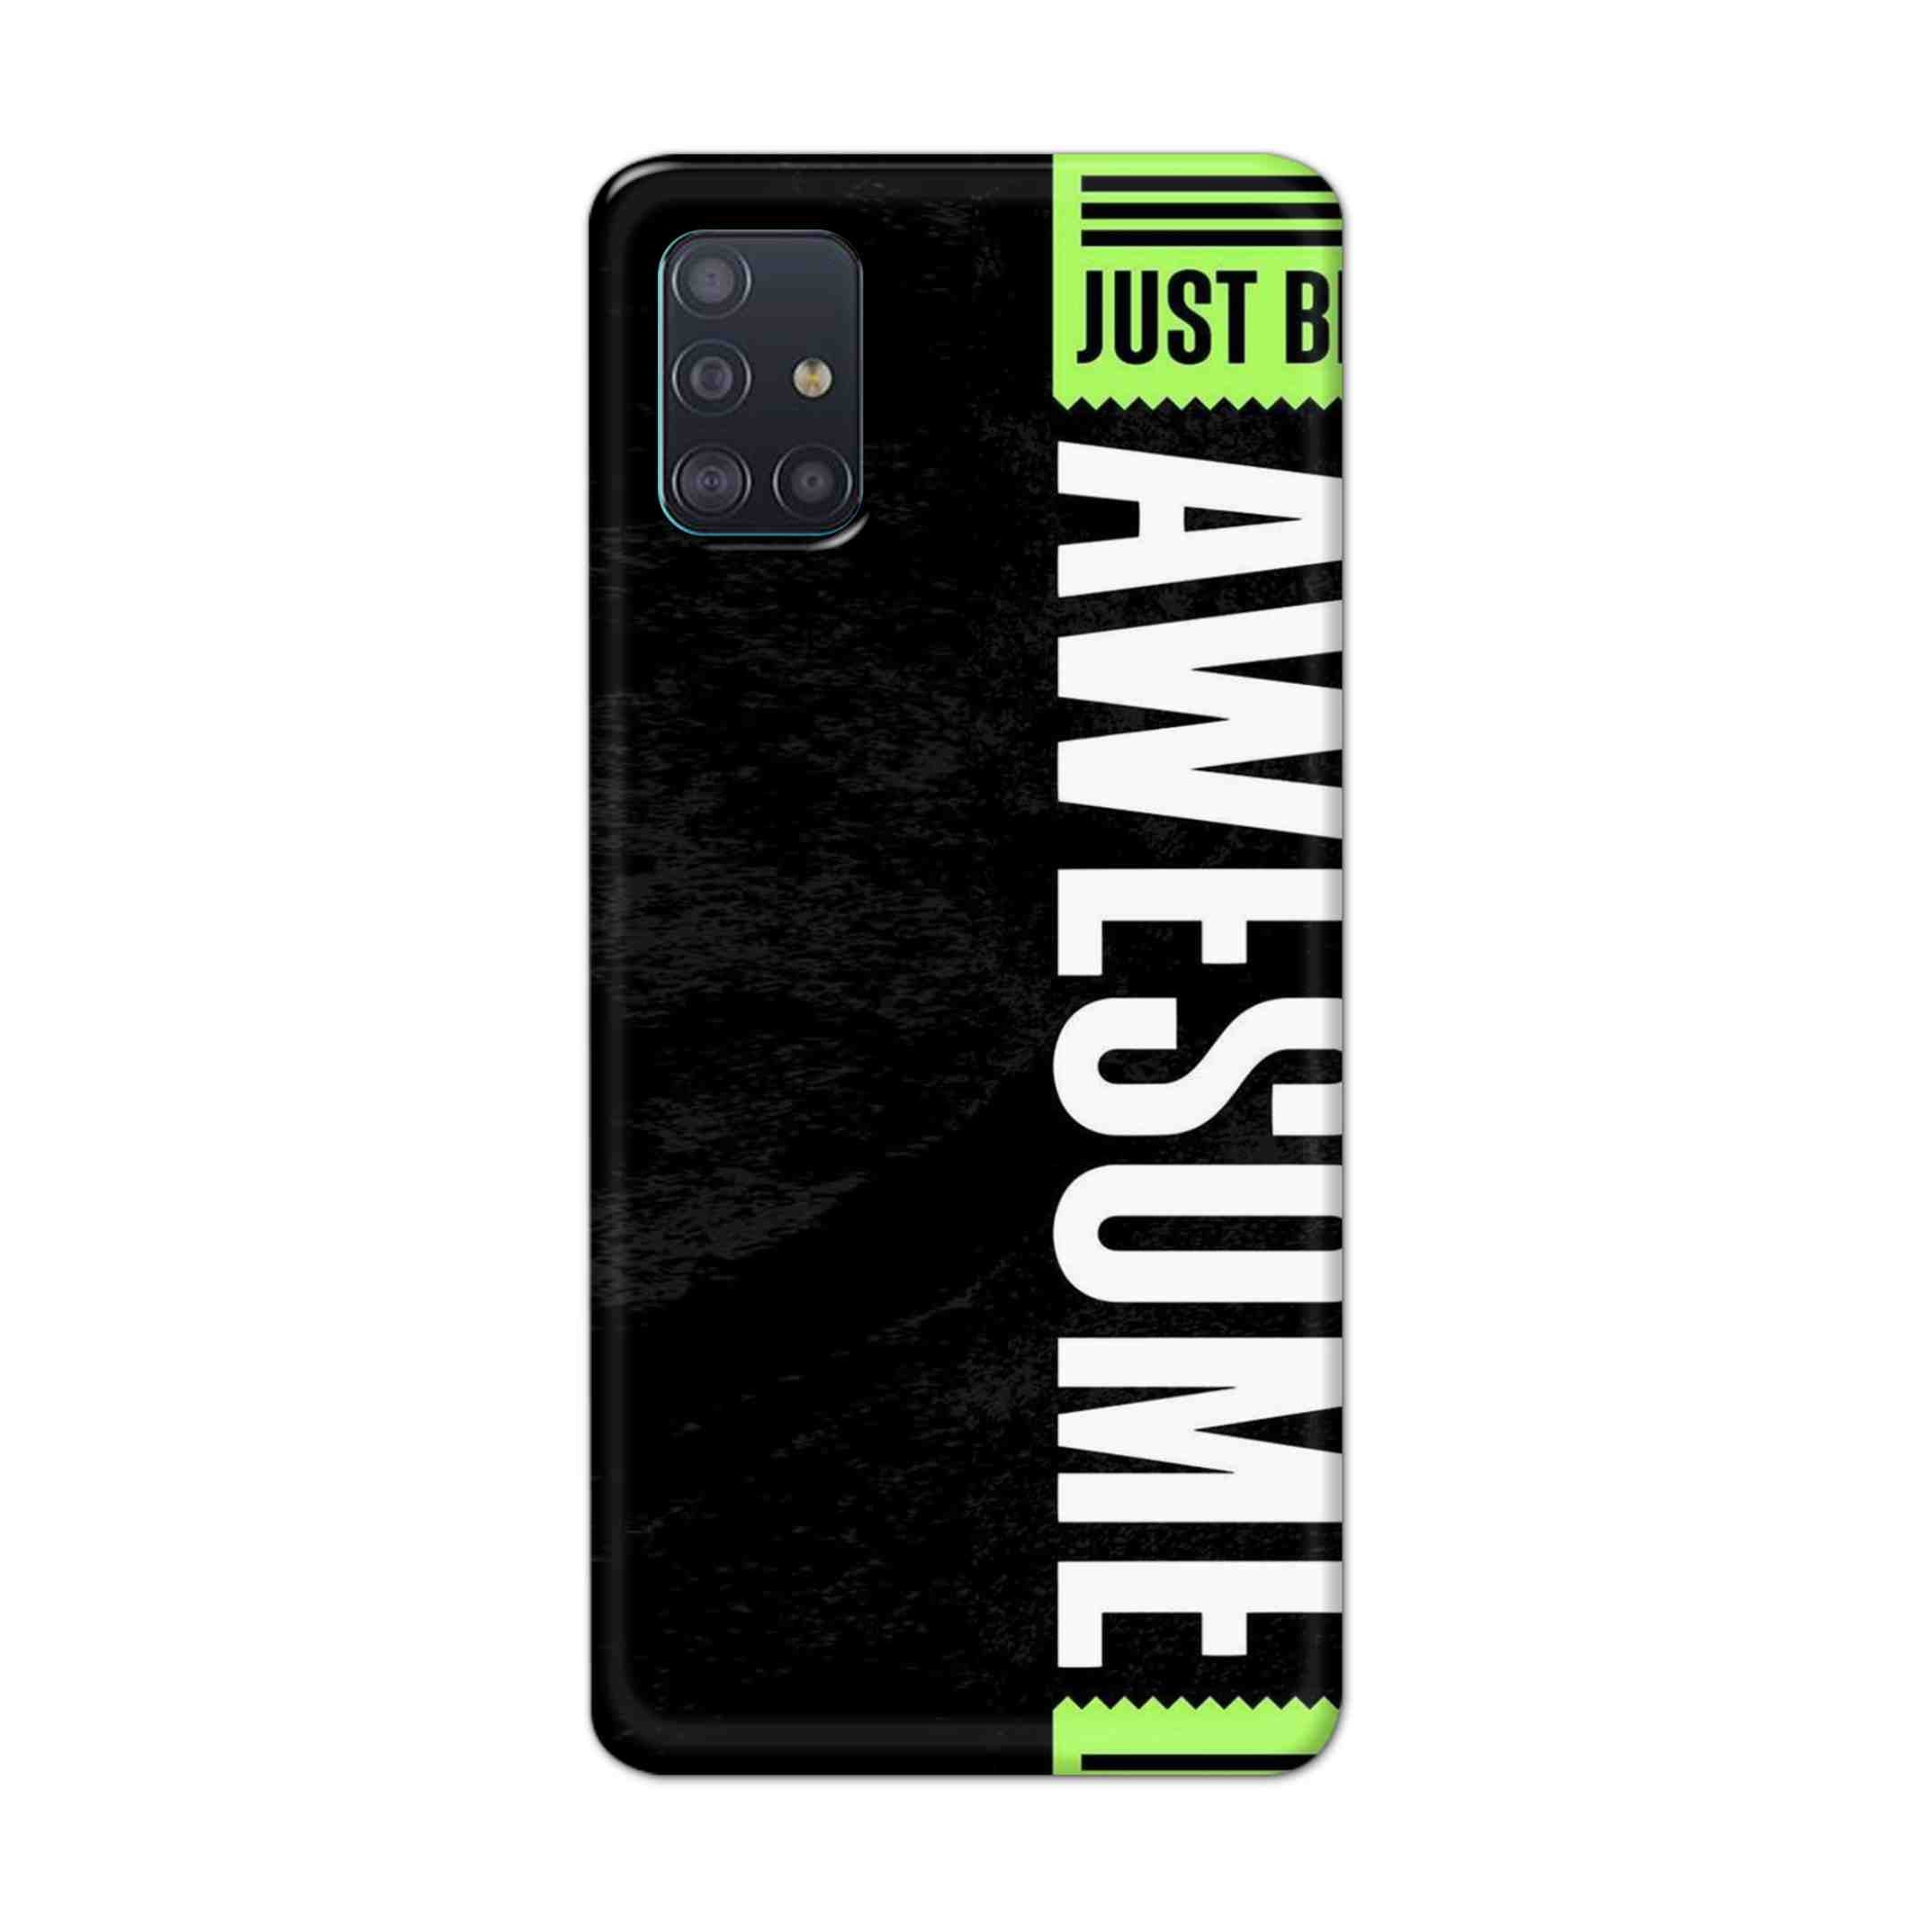 Buy Awesome Street Hard Back Mobile Phone Case Cover For Samsung Galaxy A71 Online